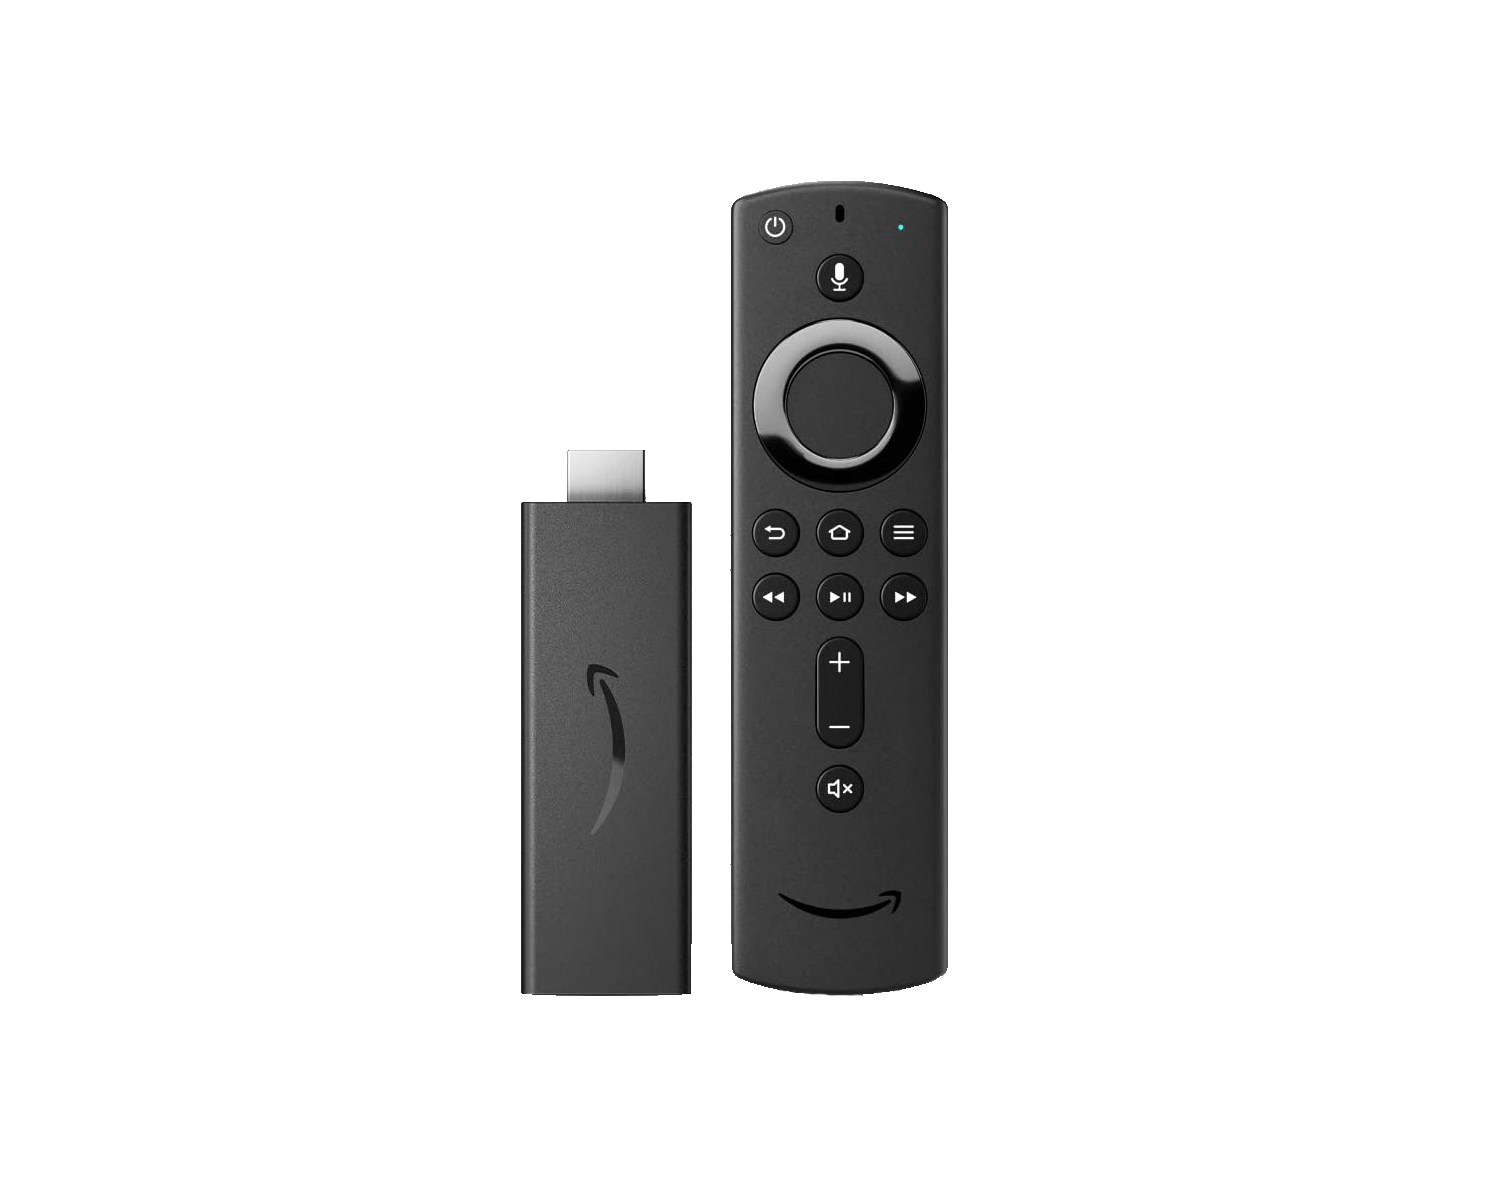 Fire TV 32 2-Series HD smart TV with Fire TV Alexa Voice Remote,  stream live TV without cable